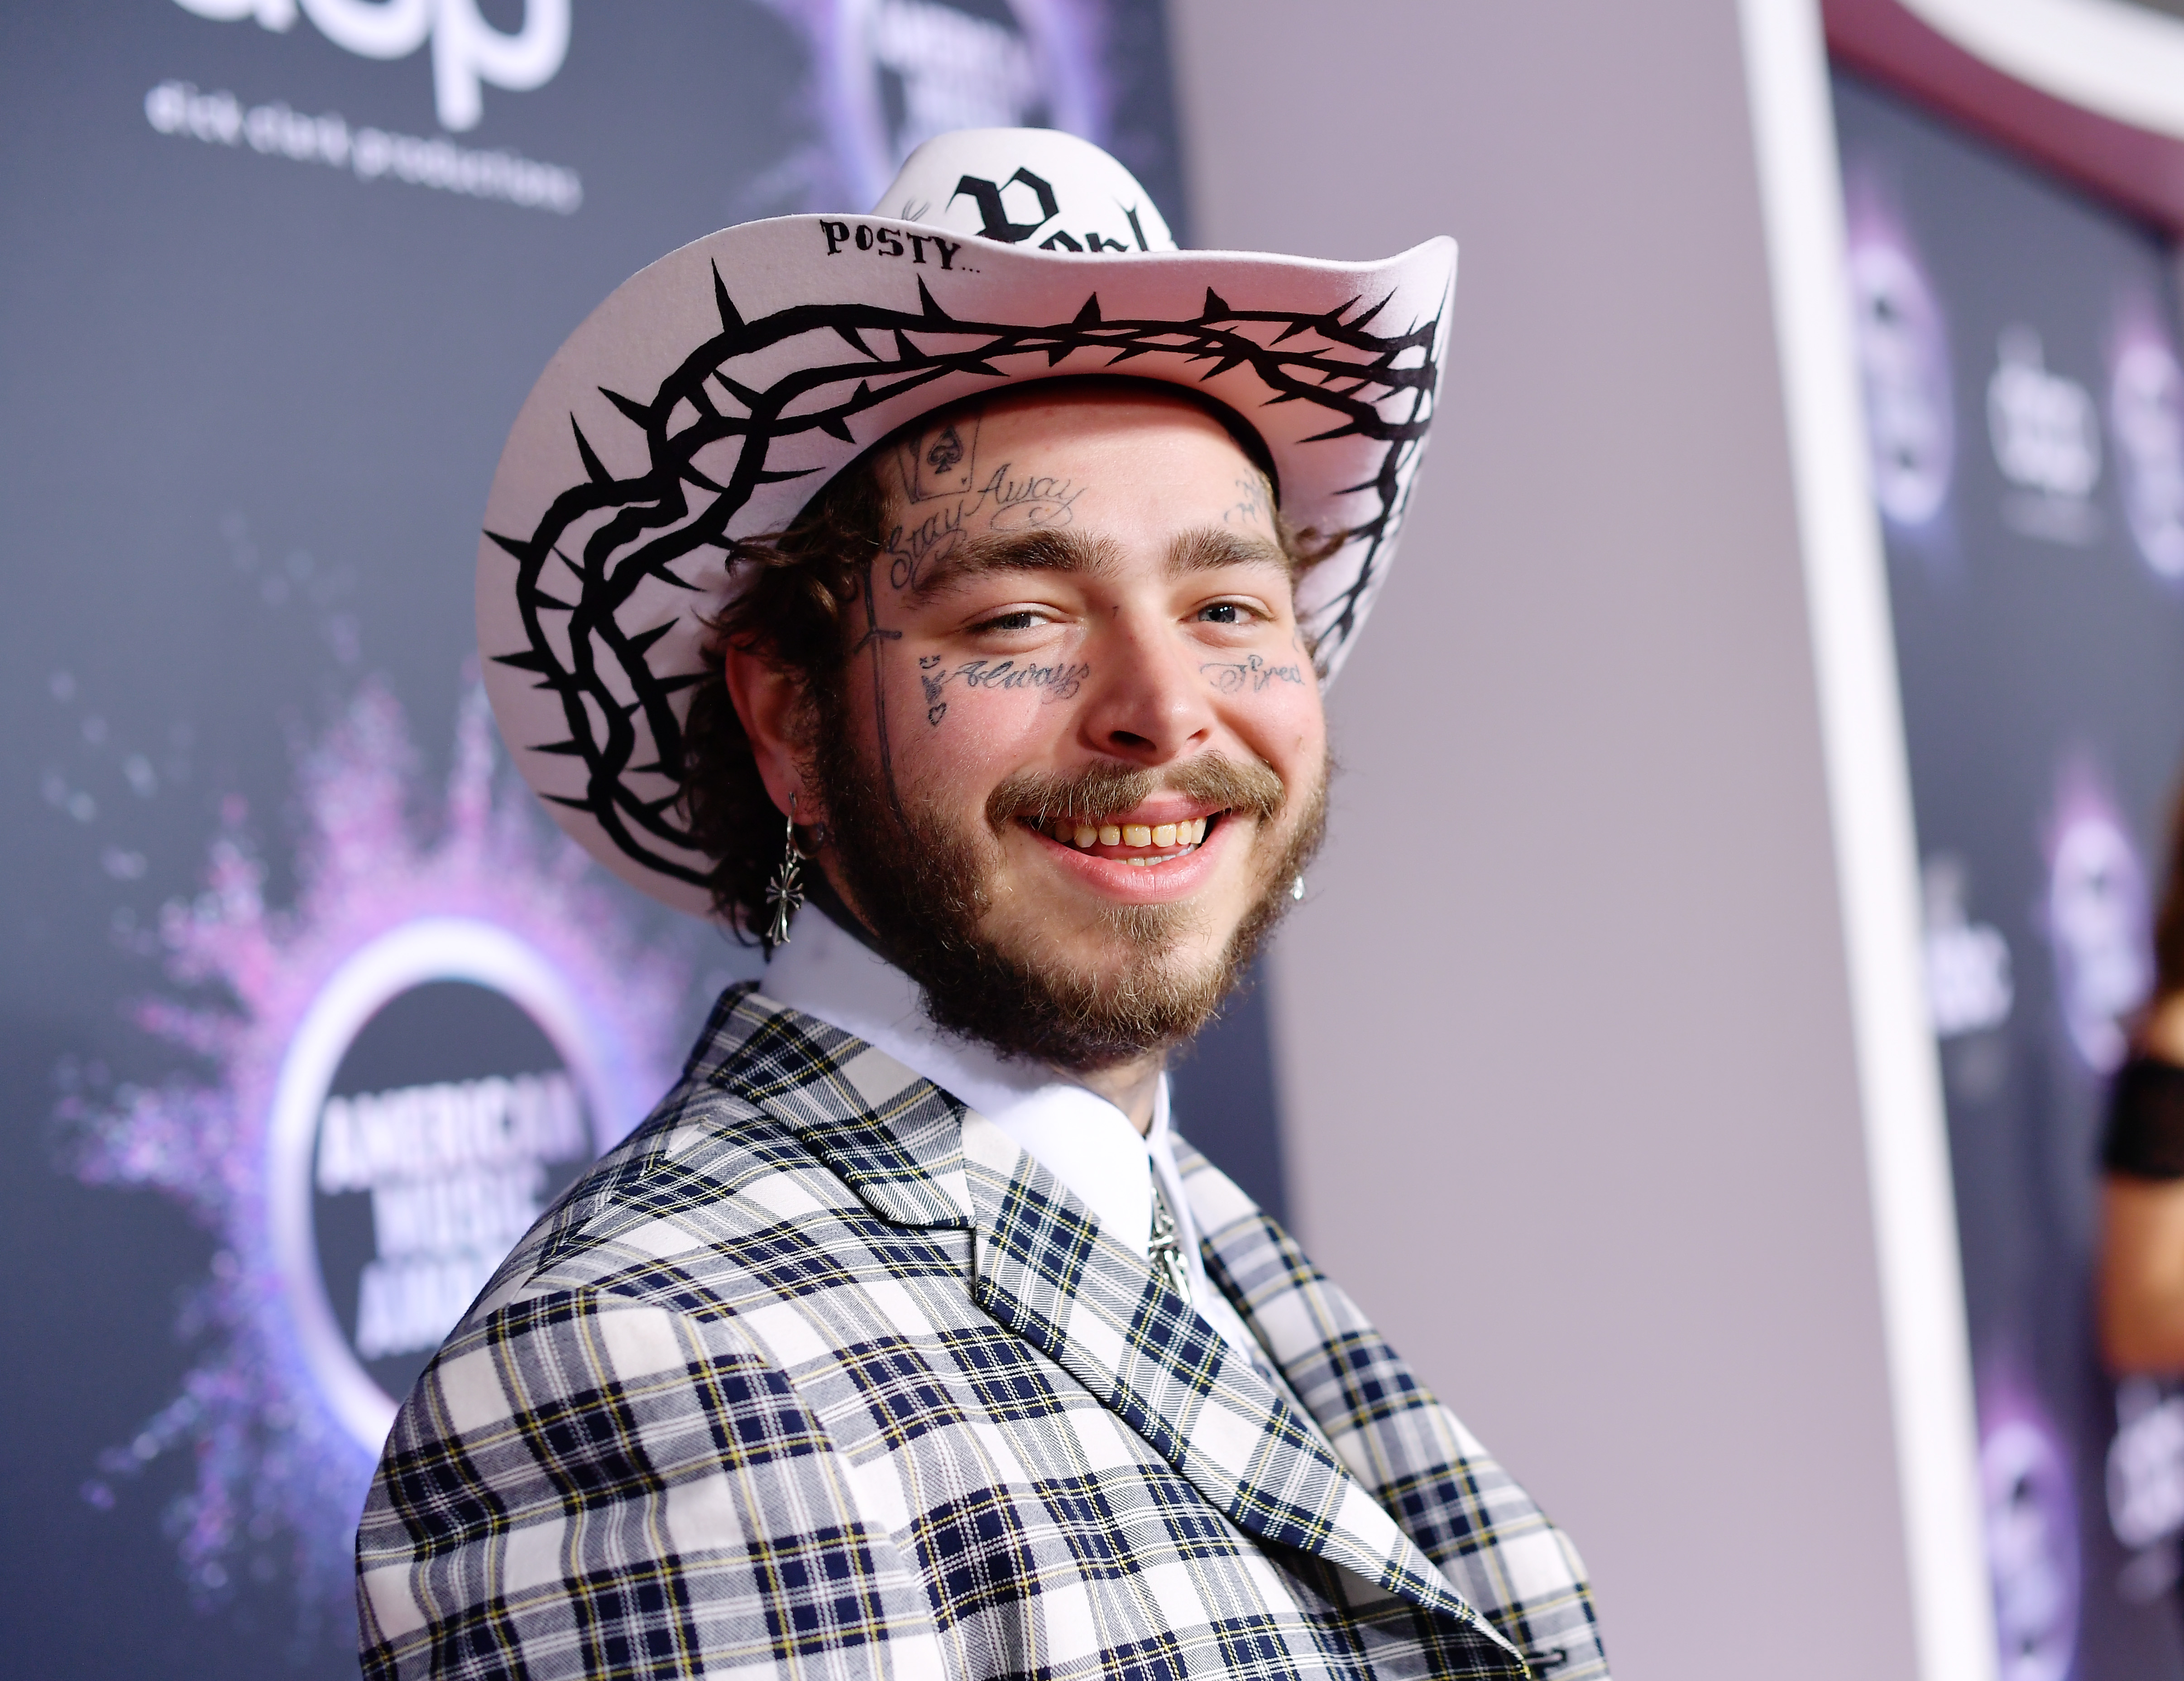 Post Malone at the 2019 American Music Awards on November 24, 2019, in Los Angeles, California. | Source: Getty Images